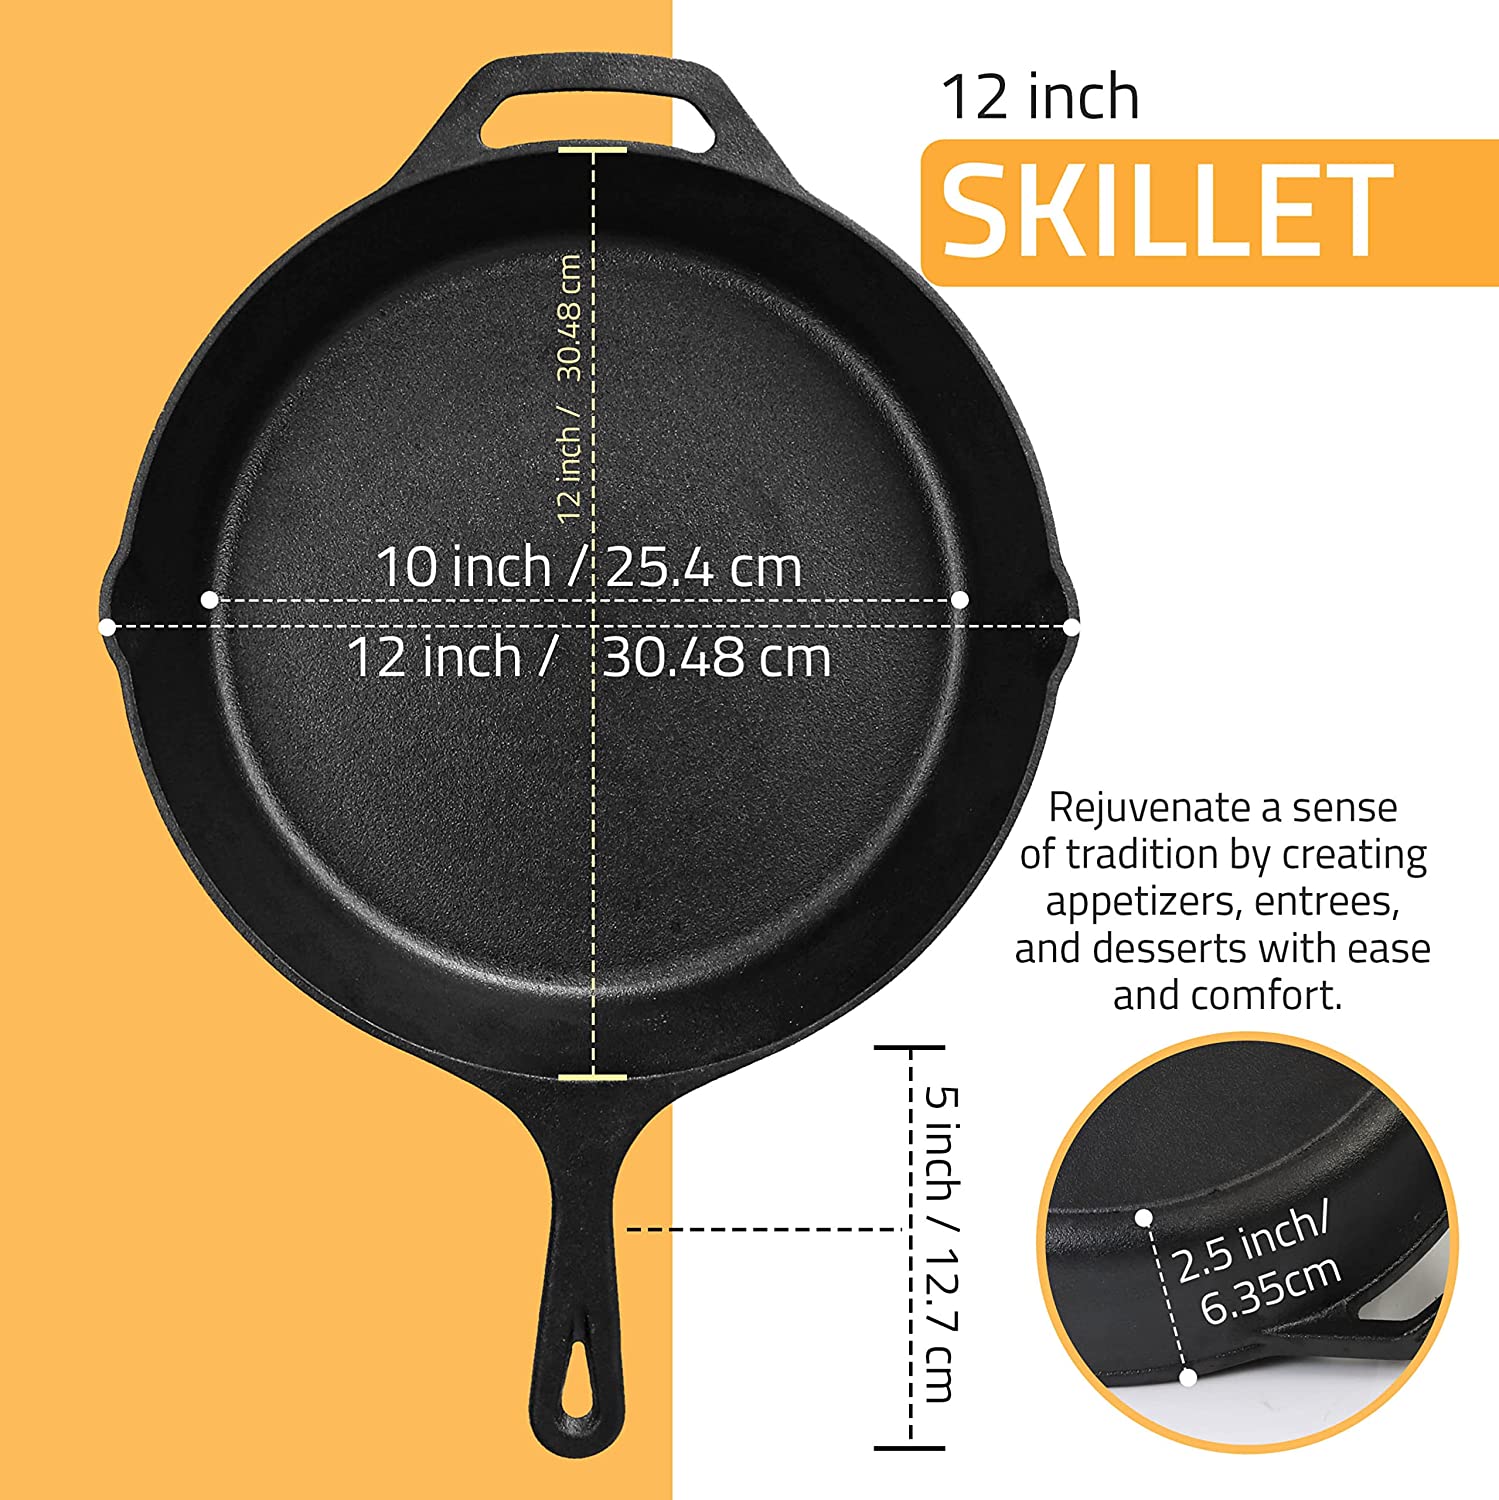 Utopia Kitchen Saute fry pan - Pre-Seasoned Cast Iron Skillet Set 3-Piece -  Frying Pan 6 Inch, 8 Inch and 10 Inch Cast Iron Set (Black)